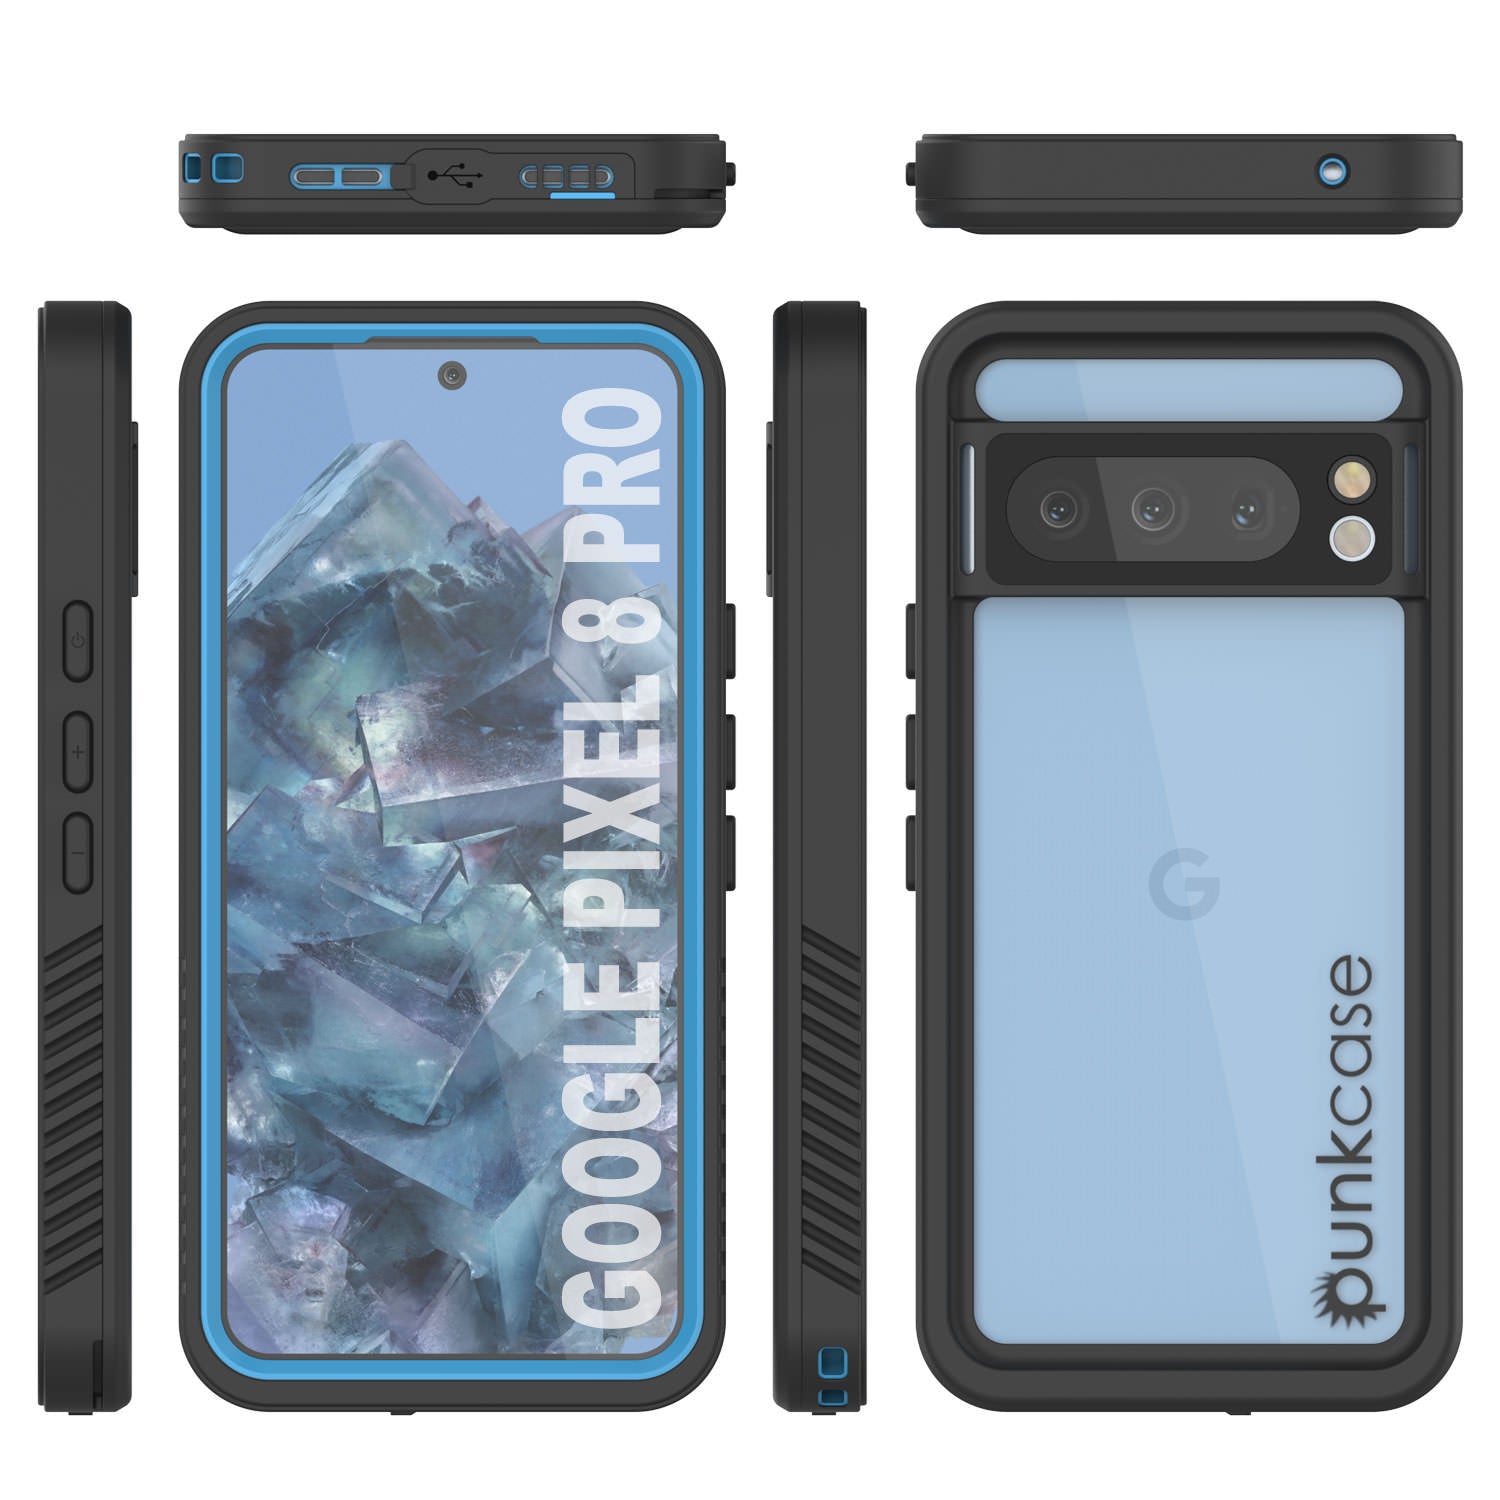 Google Pixel 8 Pro Waterproof Case, Punkcase [Extreme Series] Armor Cover W/ Built In Screen Protector [Light Blue]